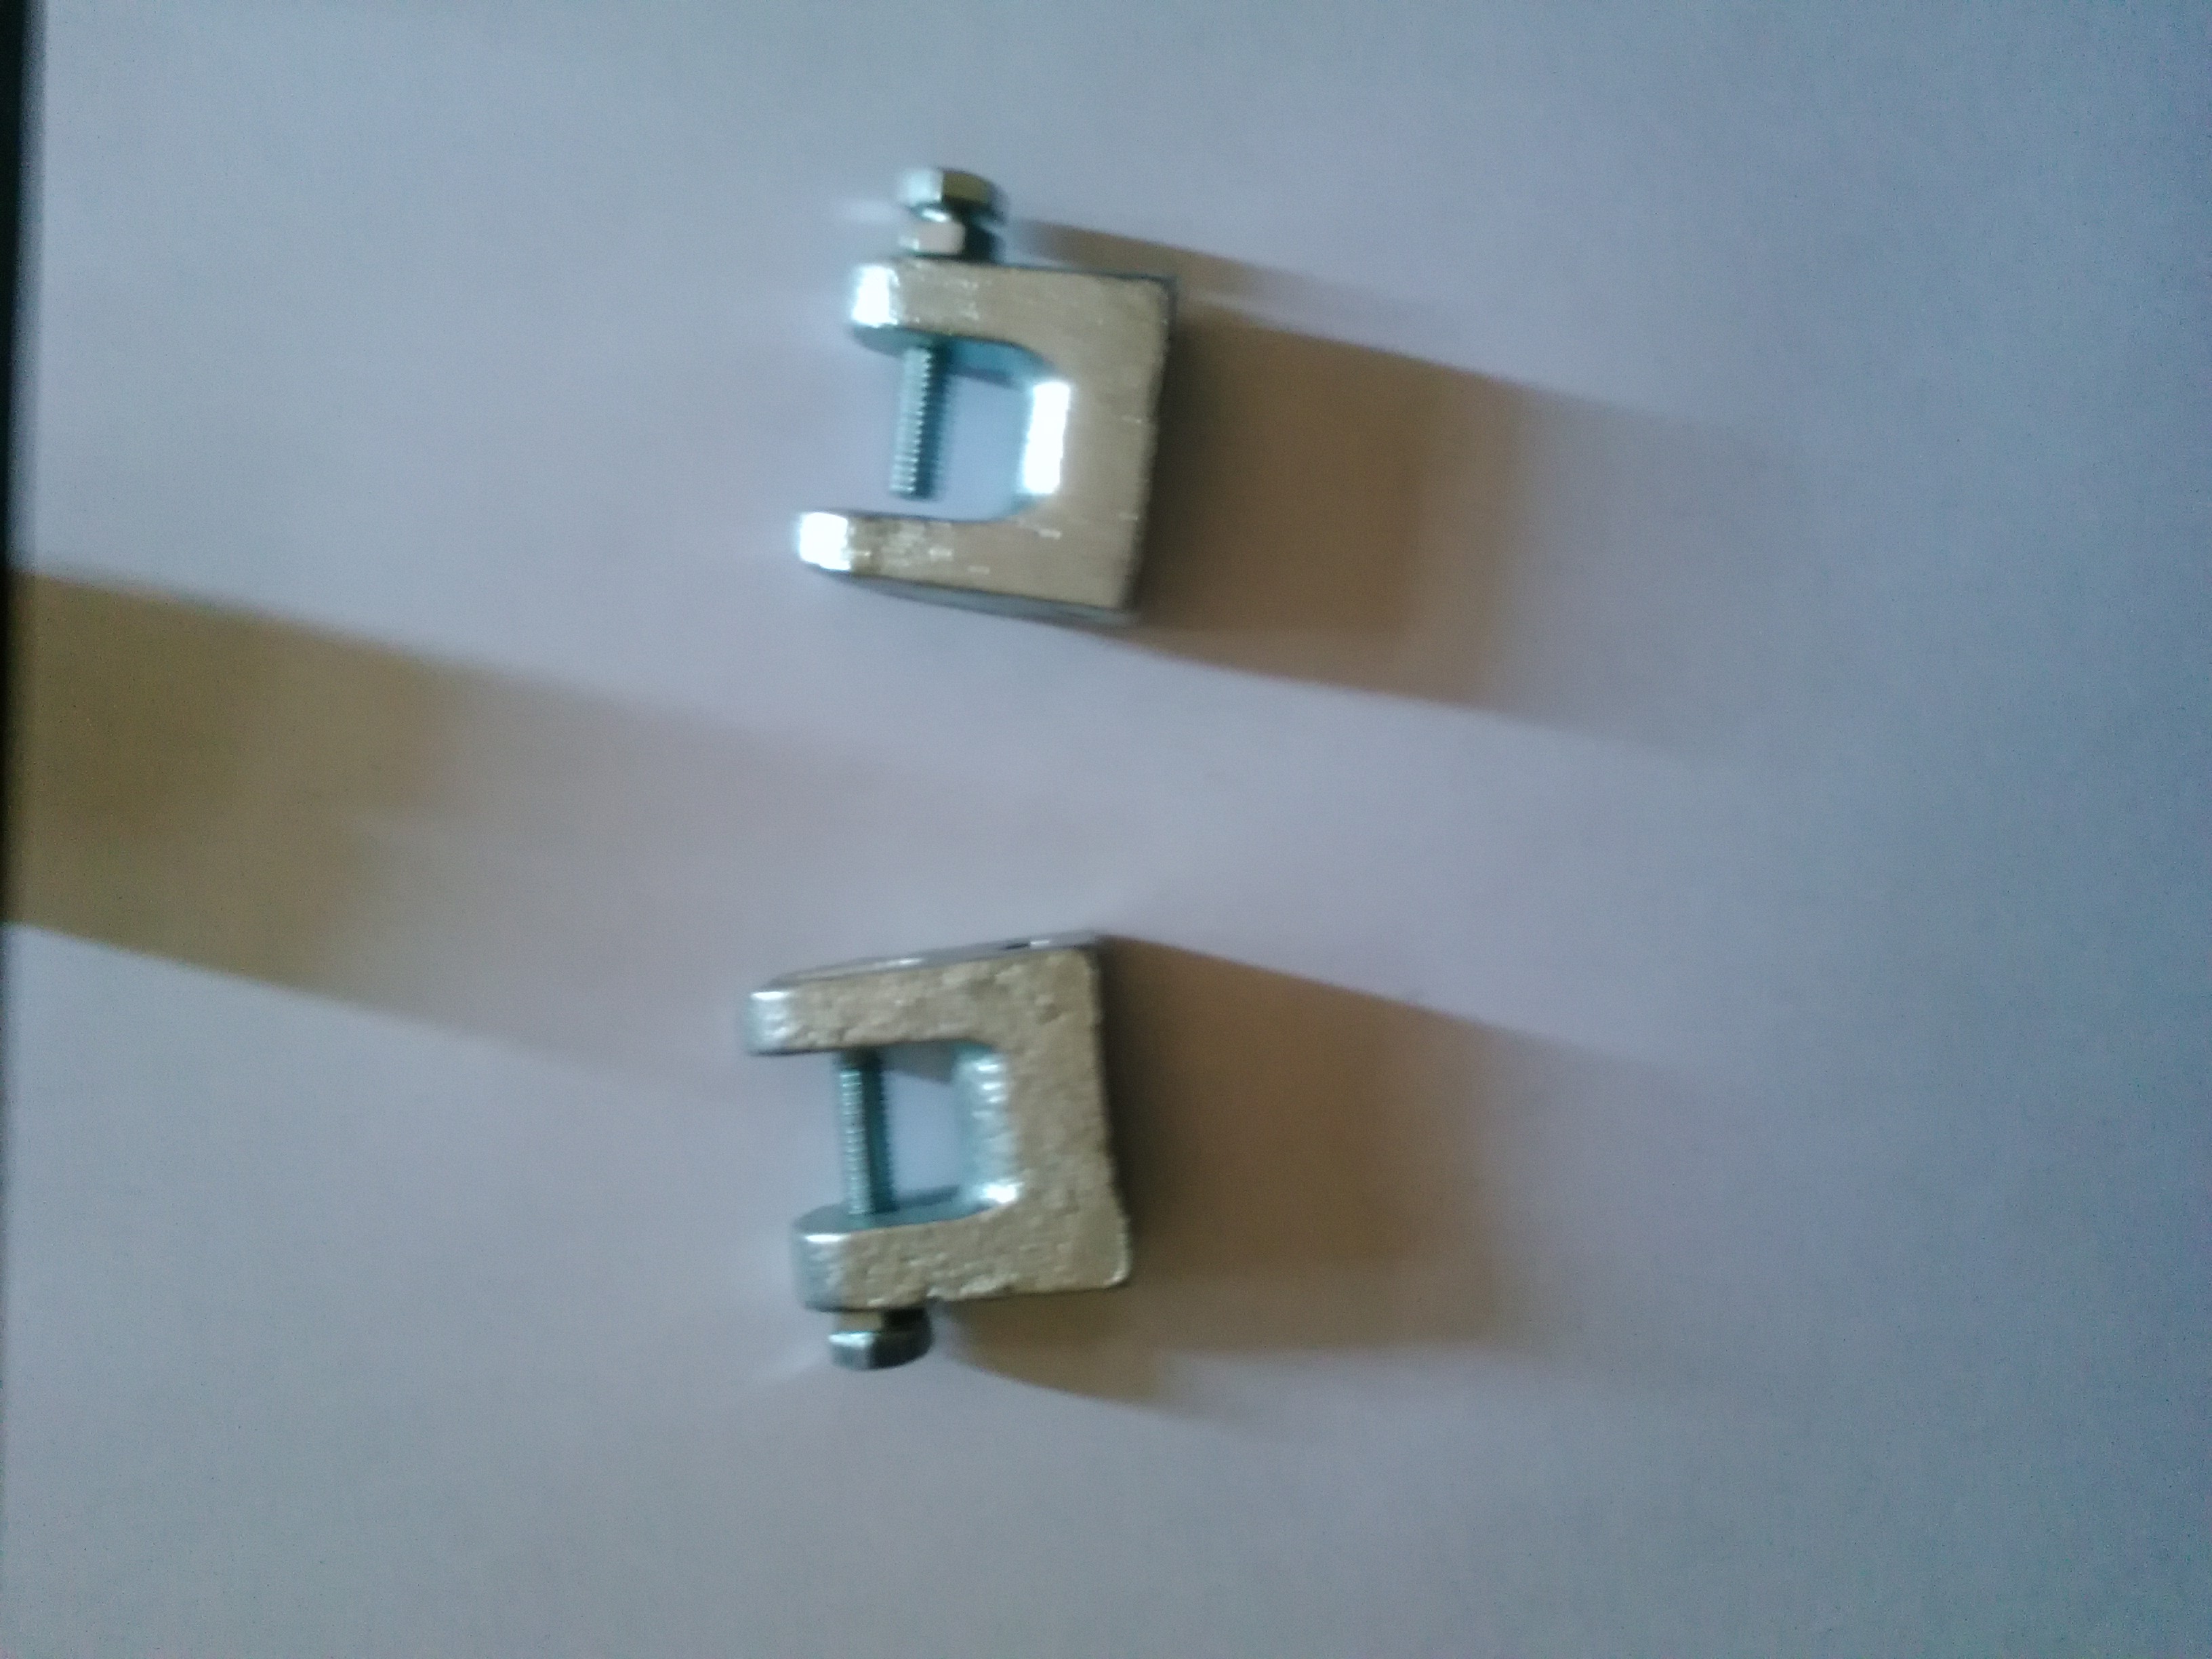 Stainless Steel Beam Clamp for Electric Industry, Investment Casting